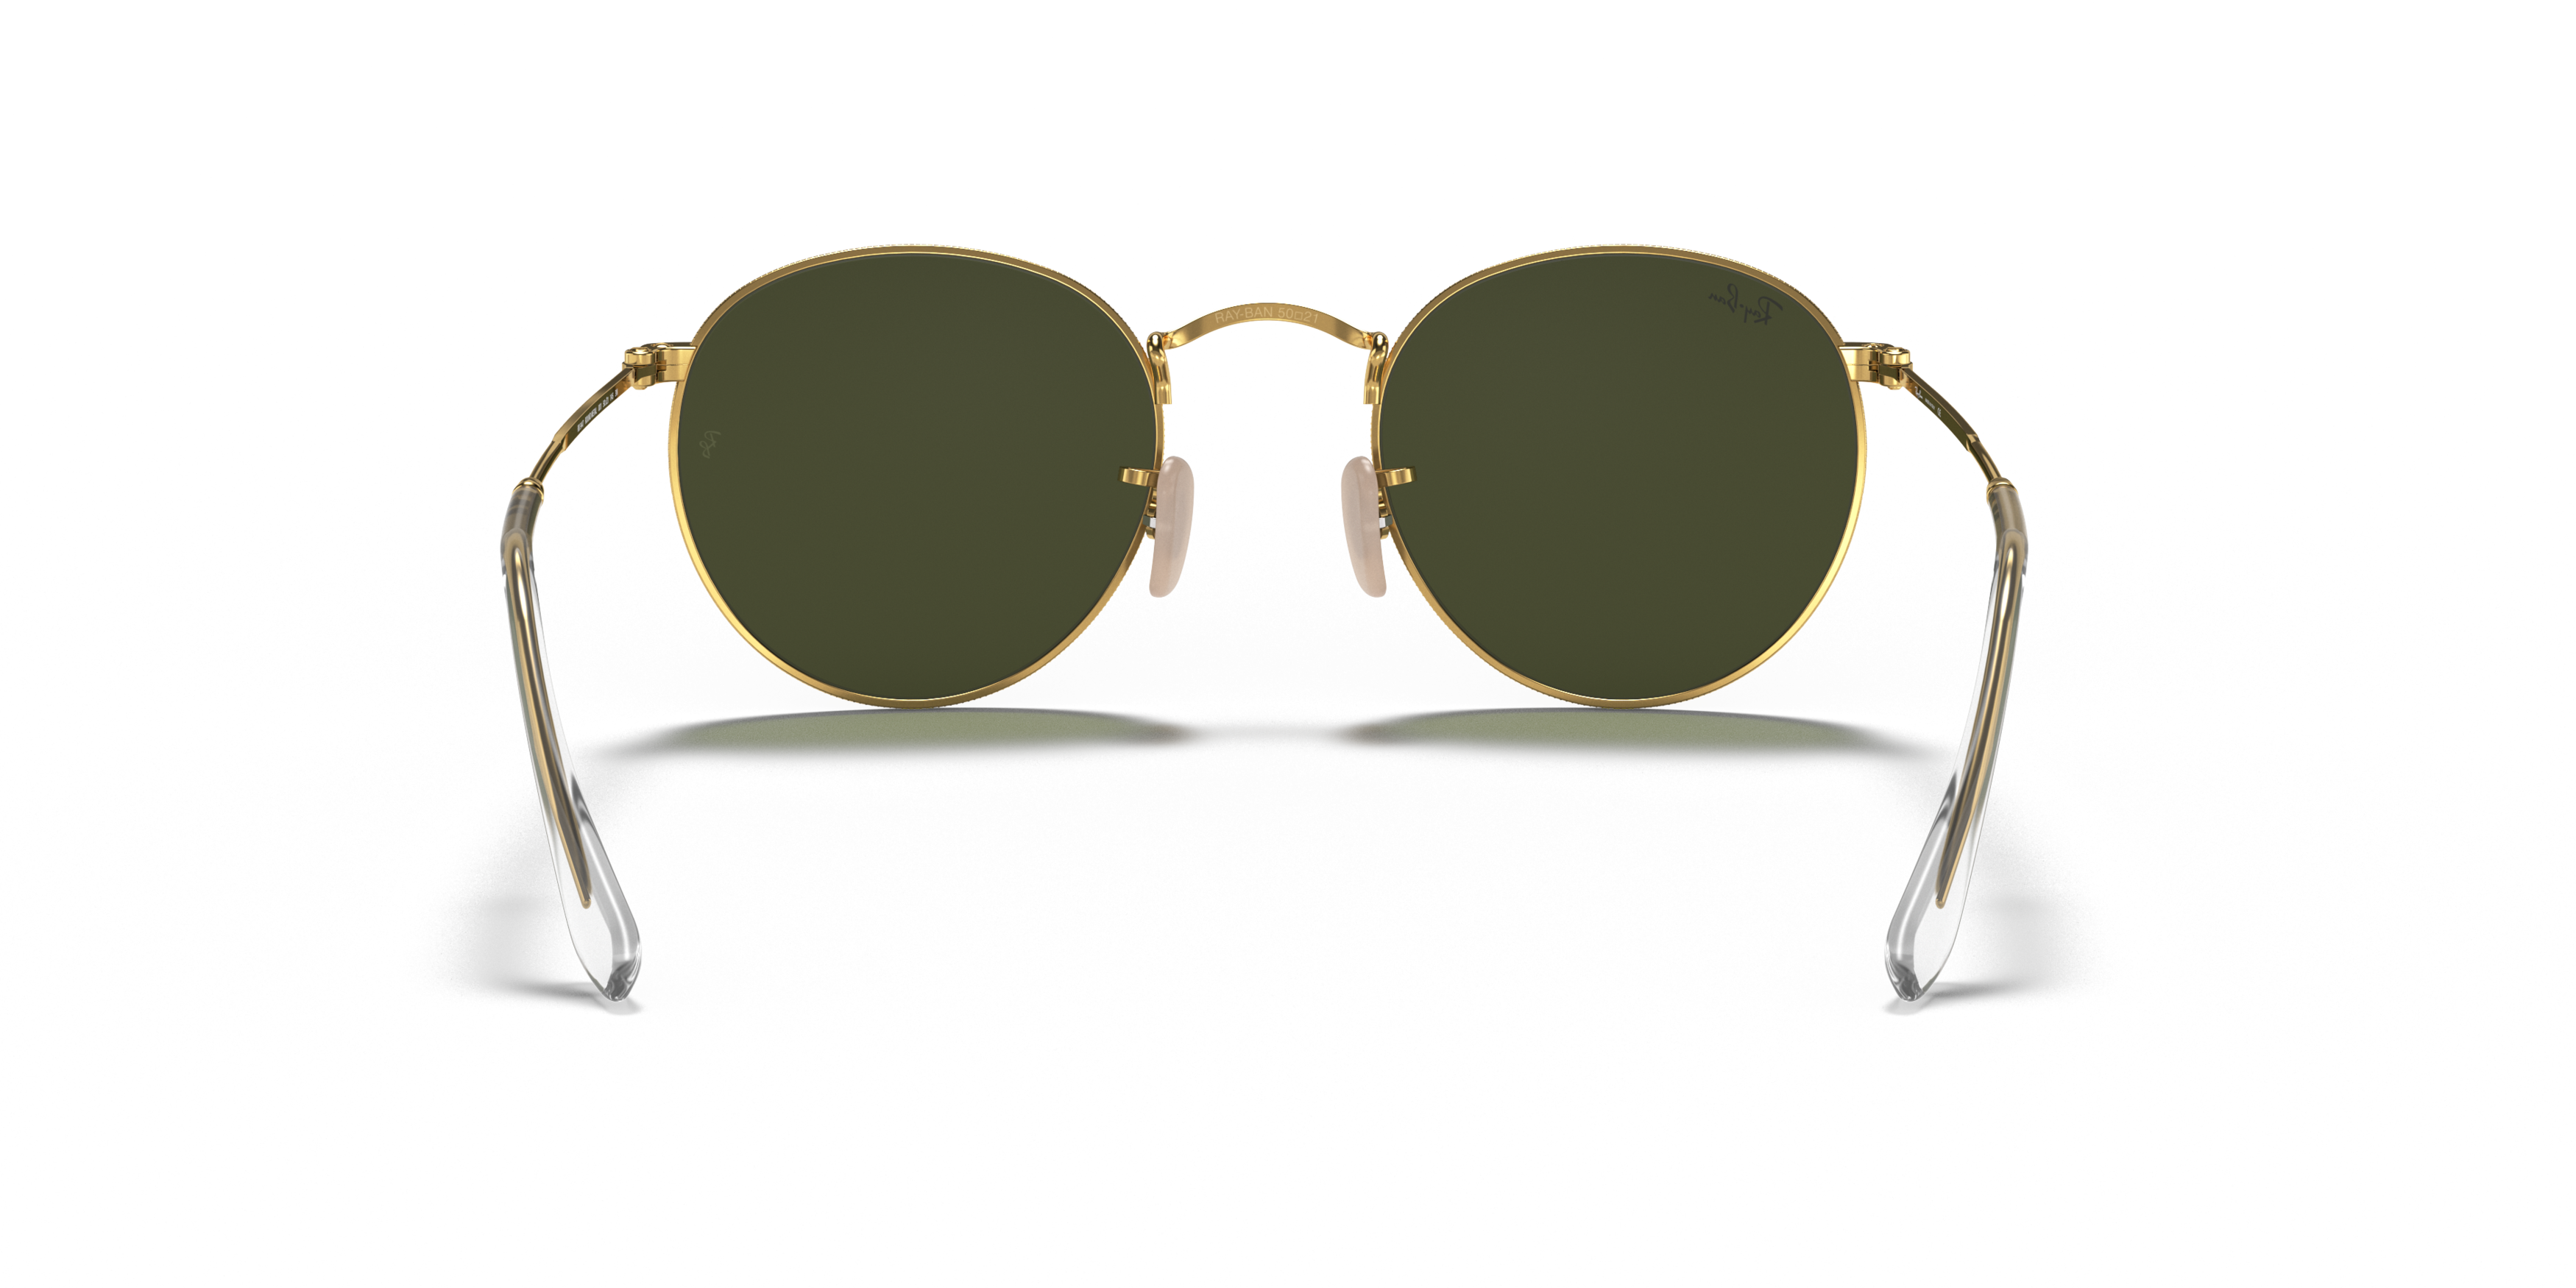 Detail02 Ray-Ban Round RB 3447 (001) Sunglasses Green / Gold